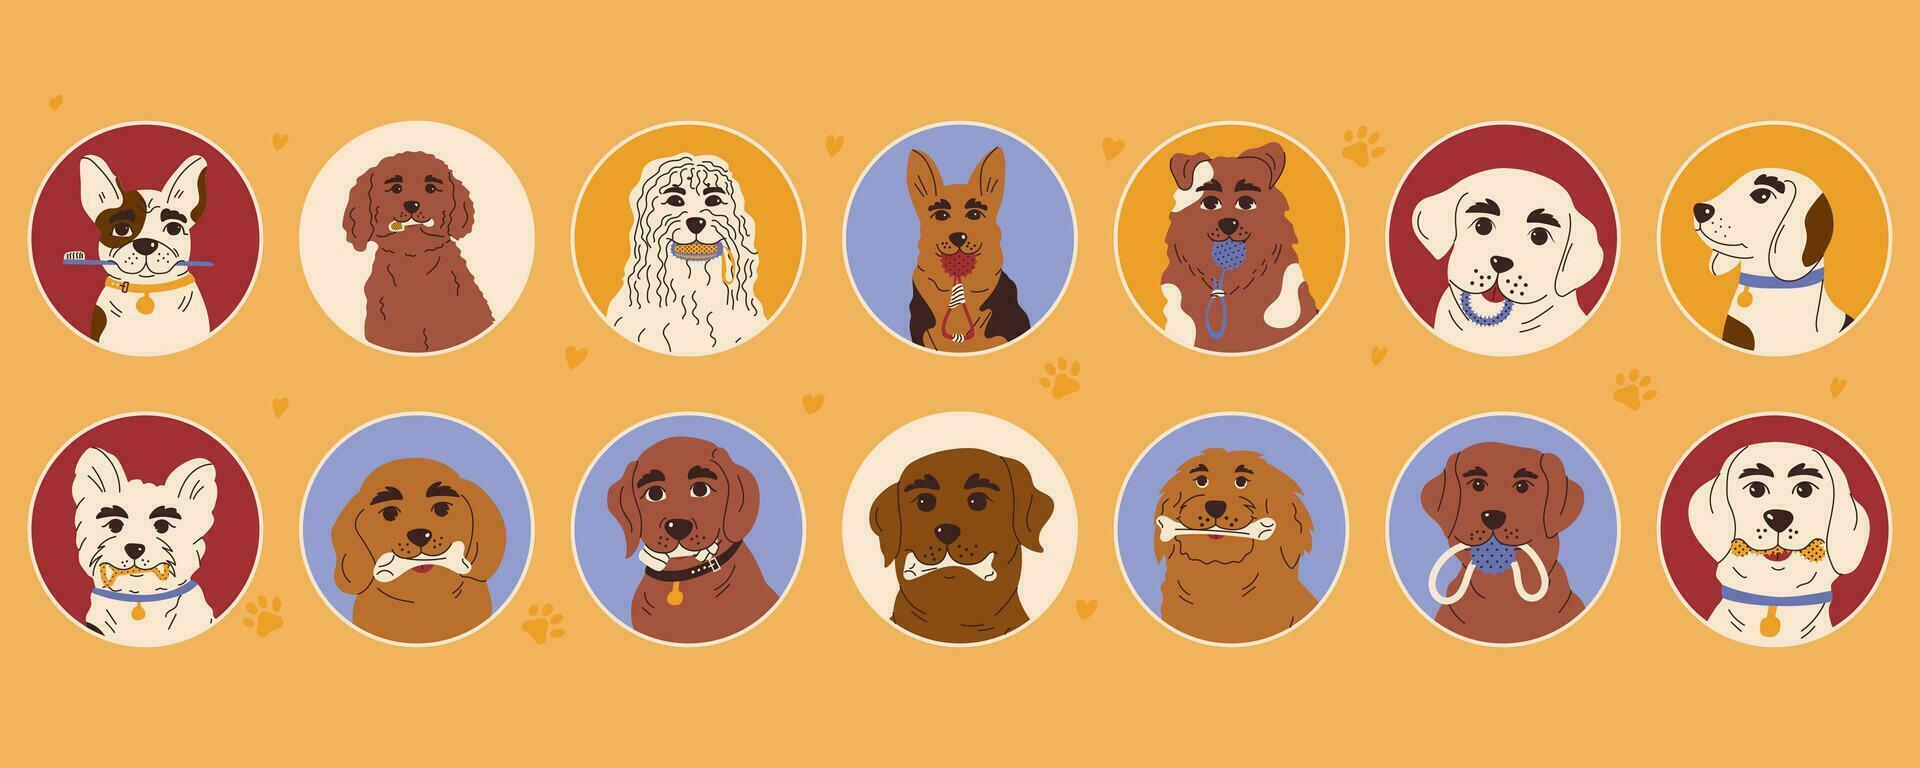 Set of stickers with different dog breeds with toys for brushing or massaging teeth. Dog dental health. Canine dental care and hygiene concept. Vector illustration